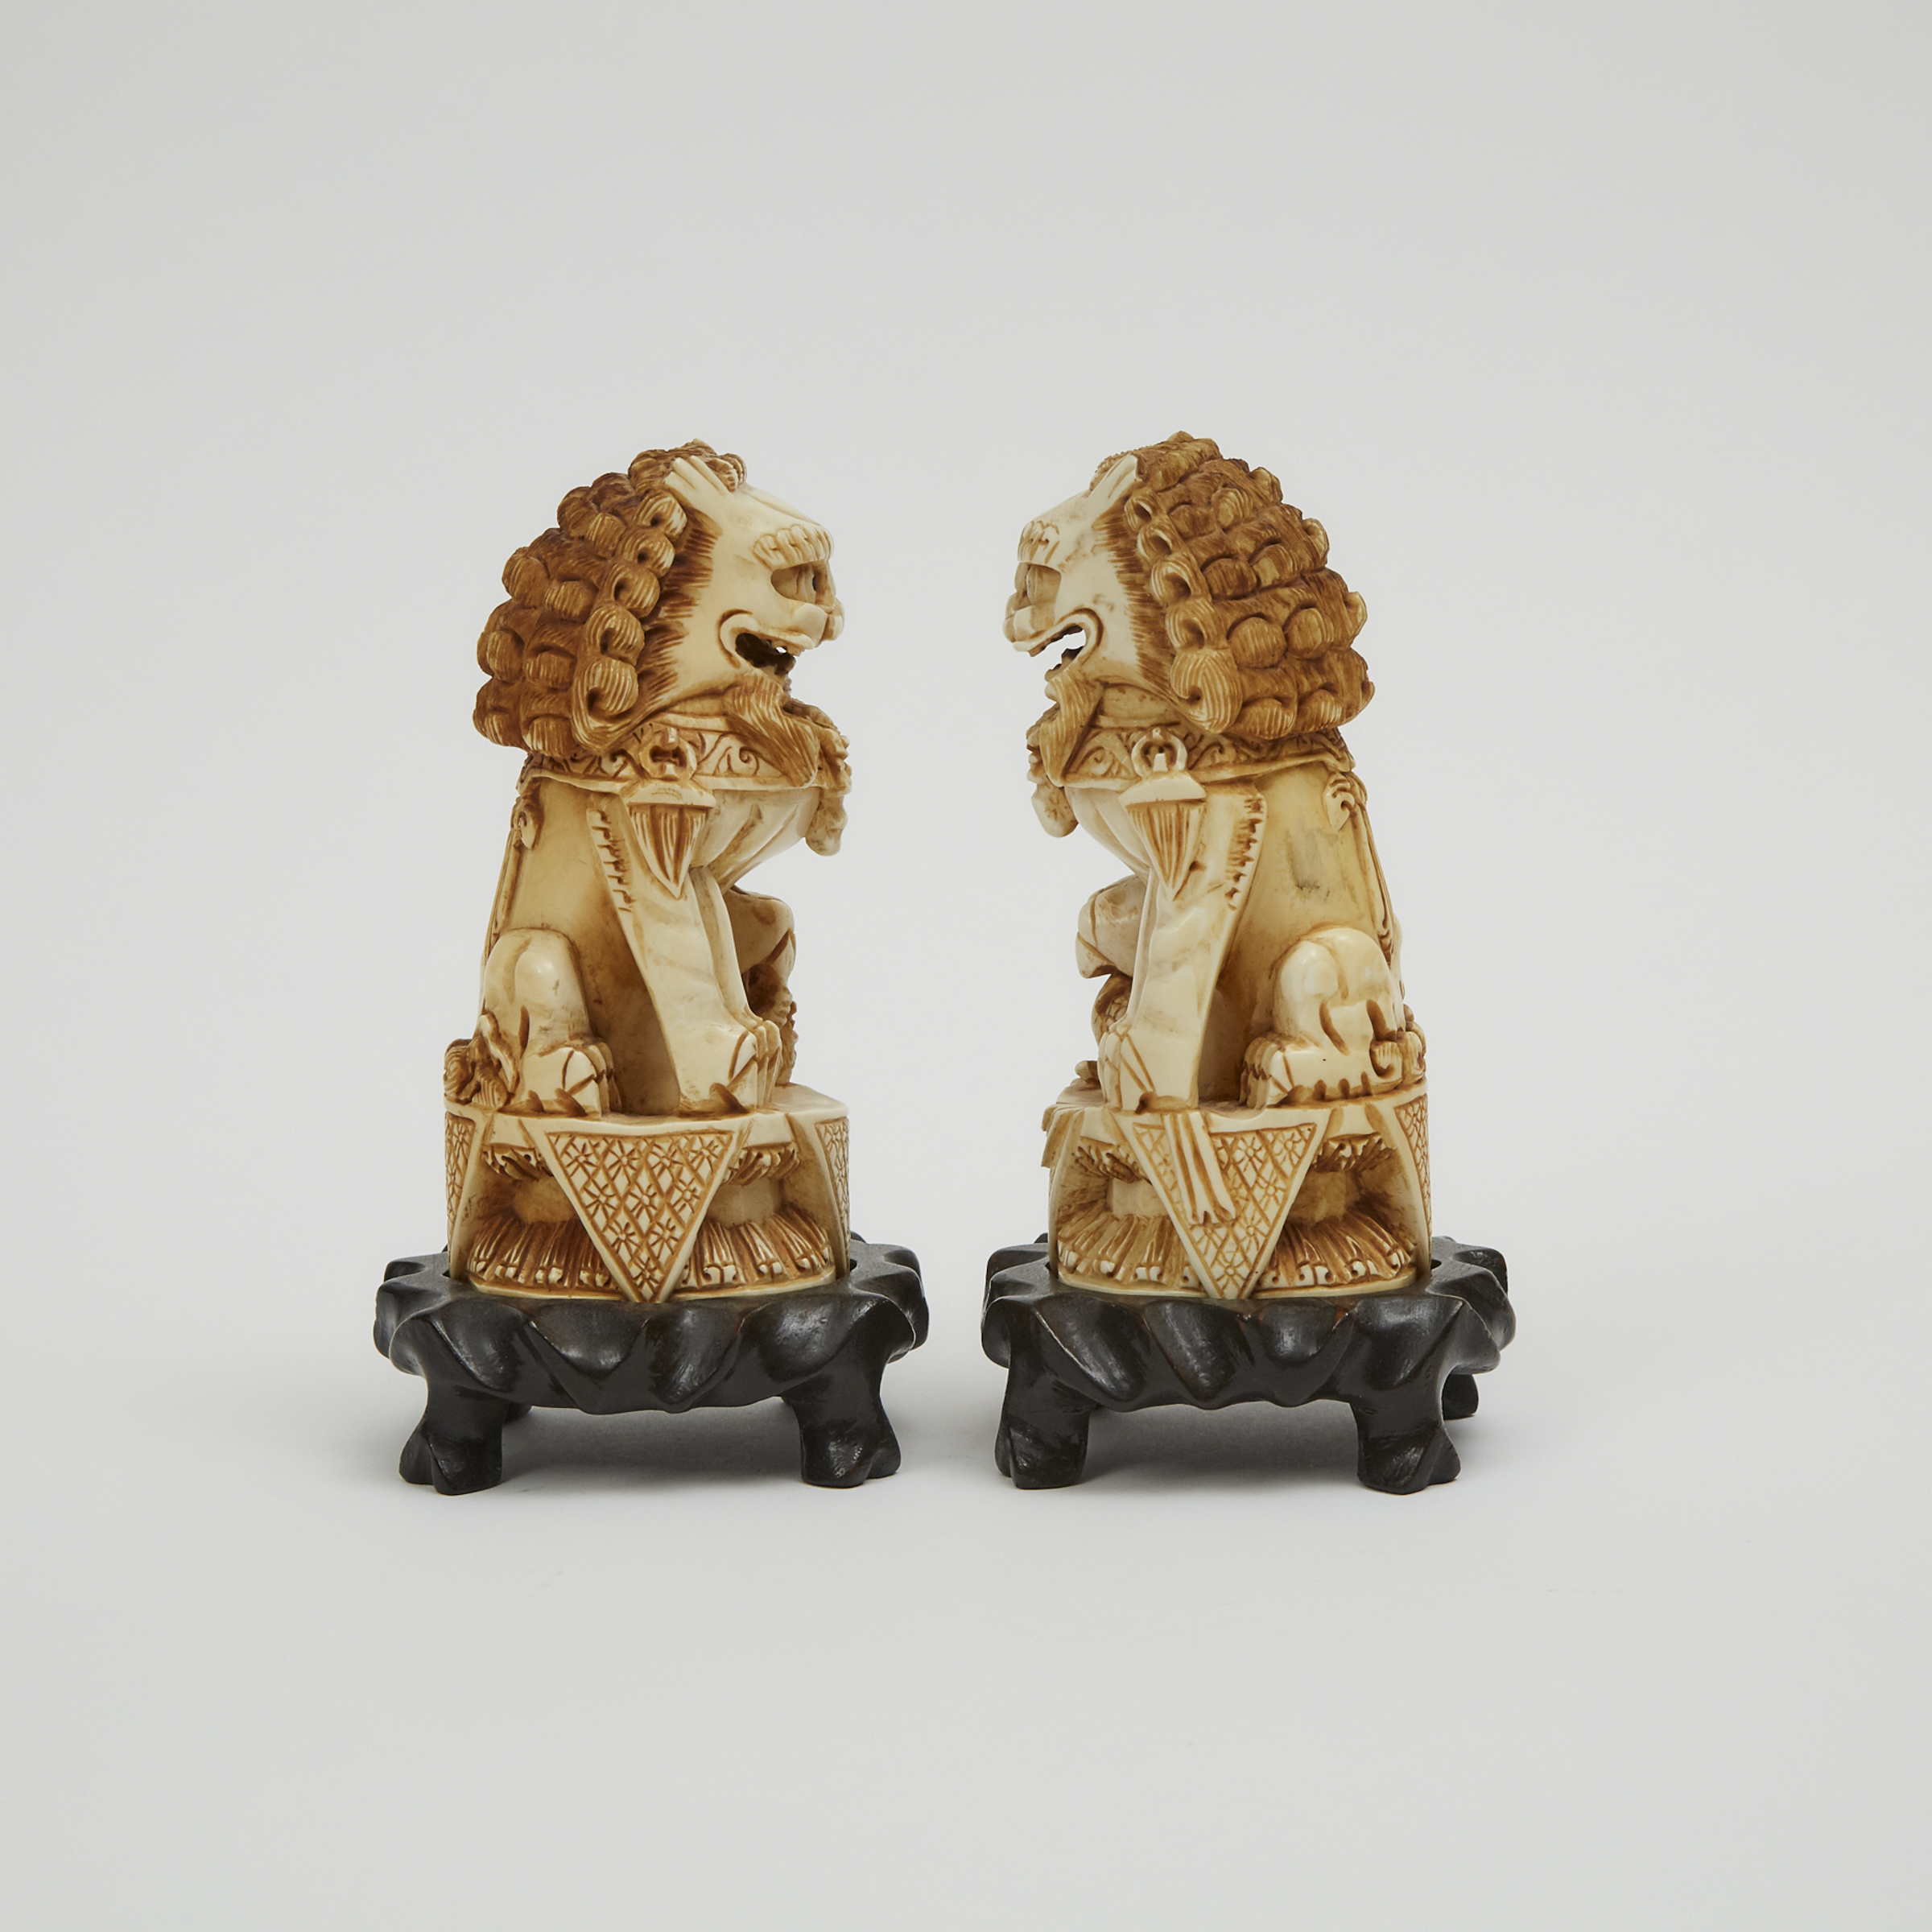 A Pair of Chinese Ivory Carved Lions, Circa 1940